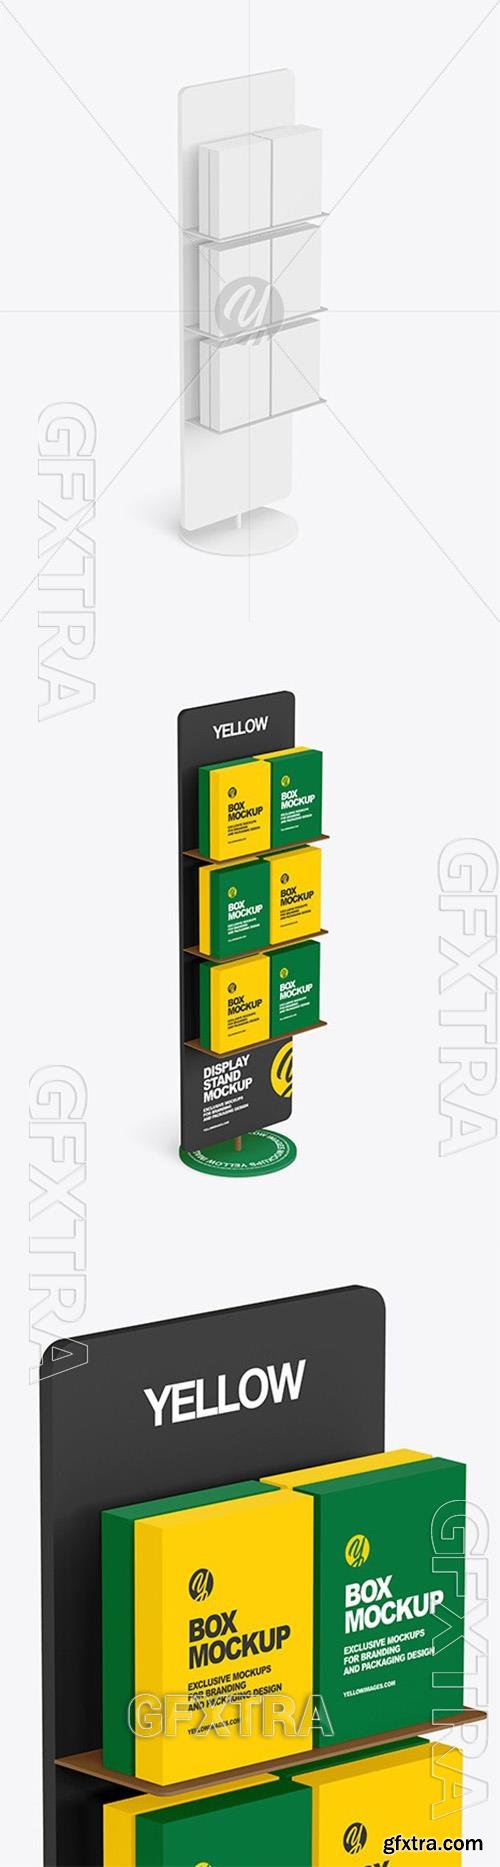 Display Stand With Boxes Mockup 97125